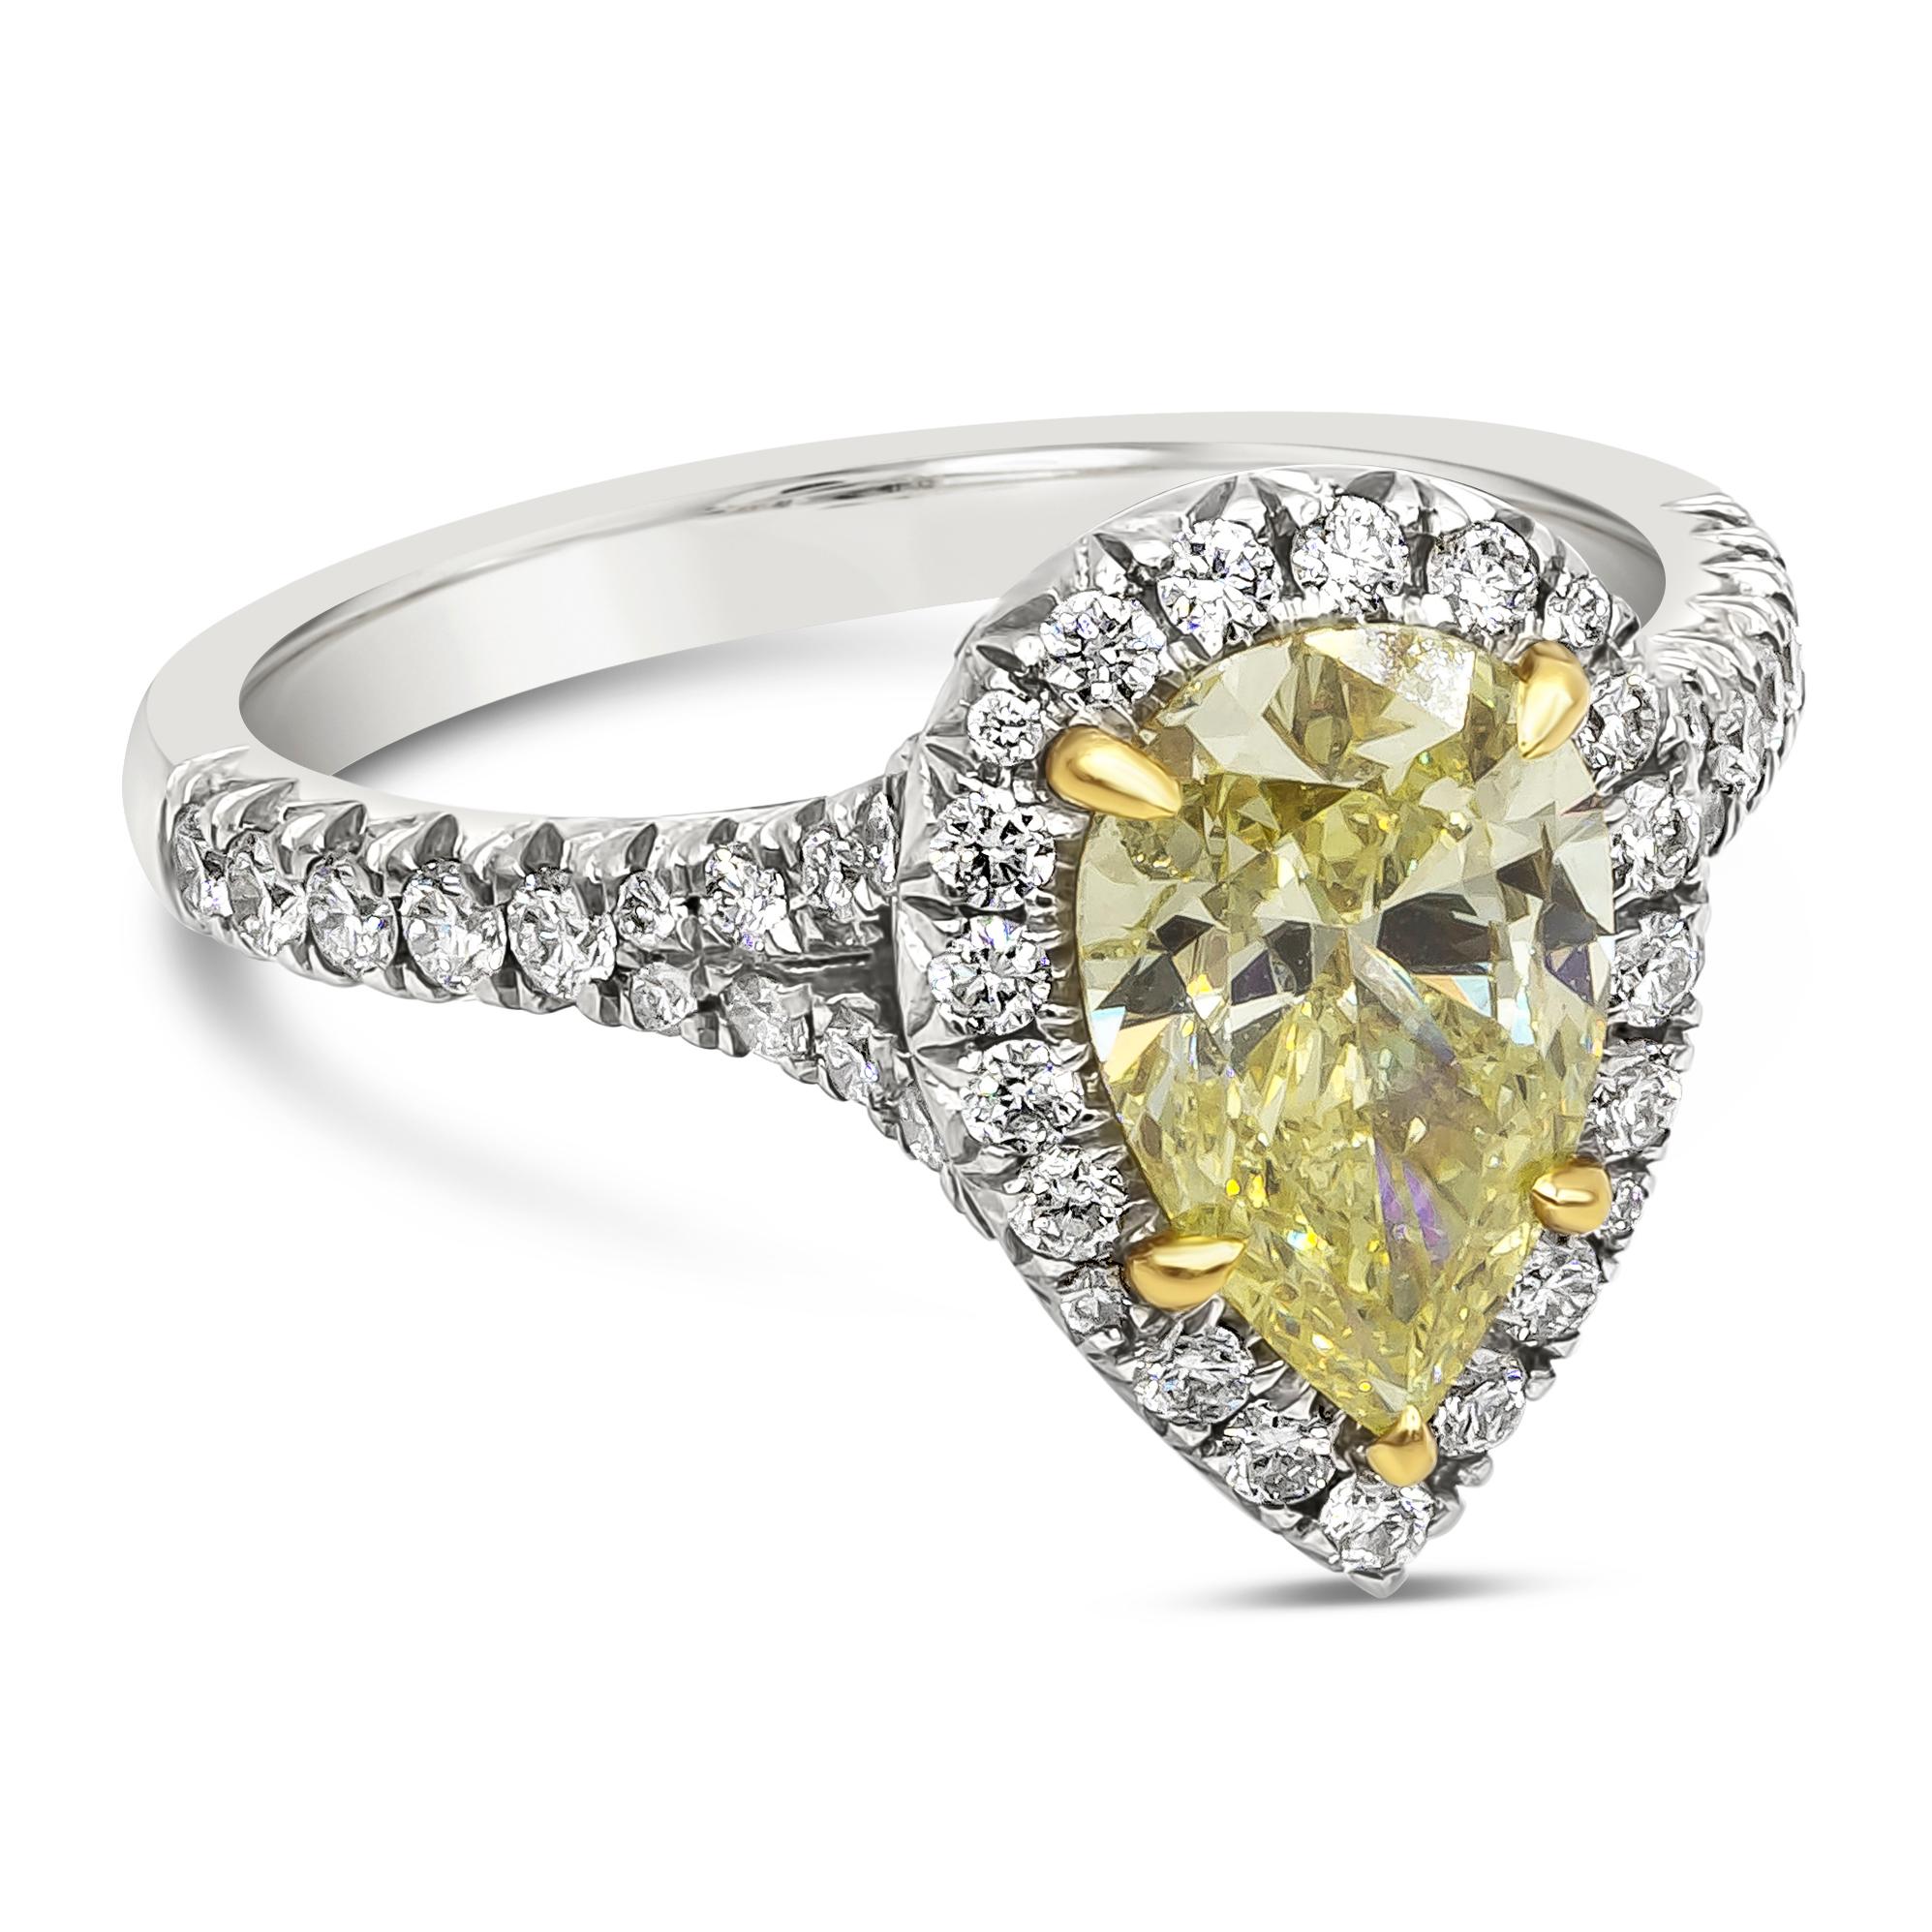 A color-rich engagement ring showcasing a 1.49 carat pear shape yellow diamond certified by GIA as Fancy Intense Yellow Color, SI2 in clarity set in five prong setting made in 18K yellow gold. Center diamond is surrounded by a row of round brilliant